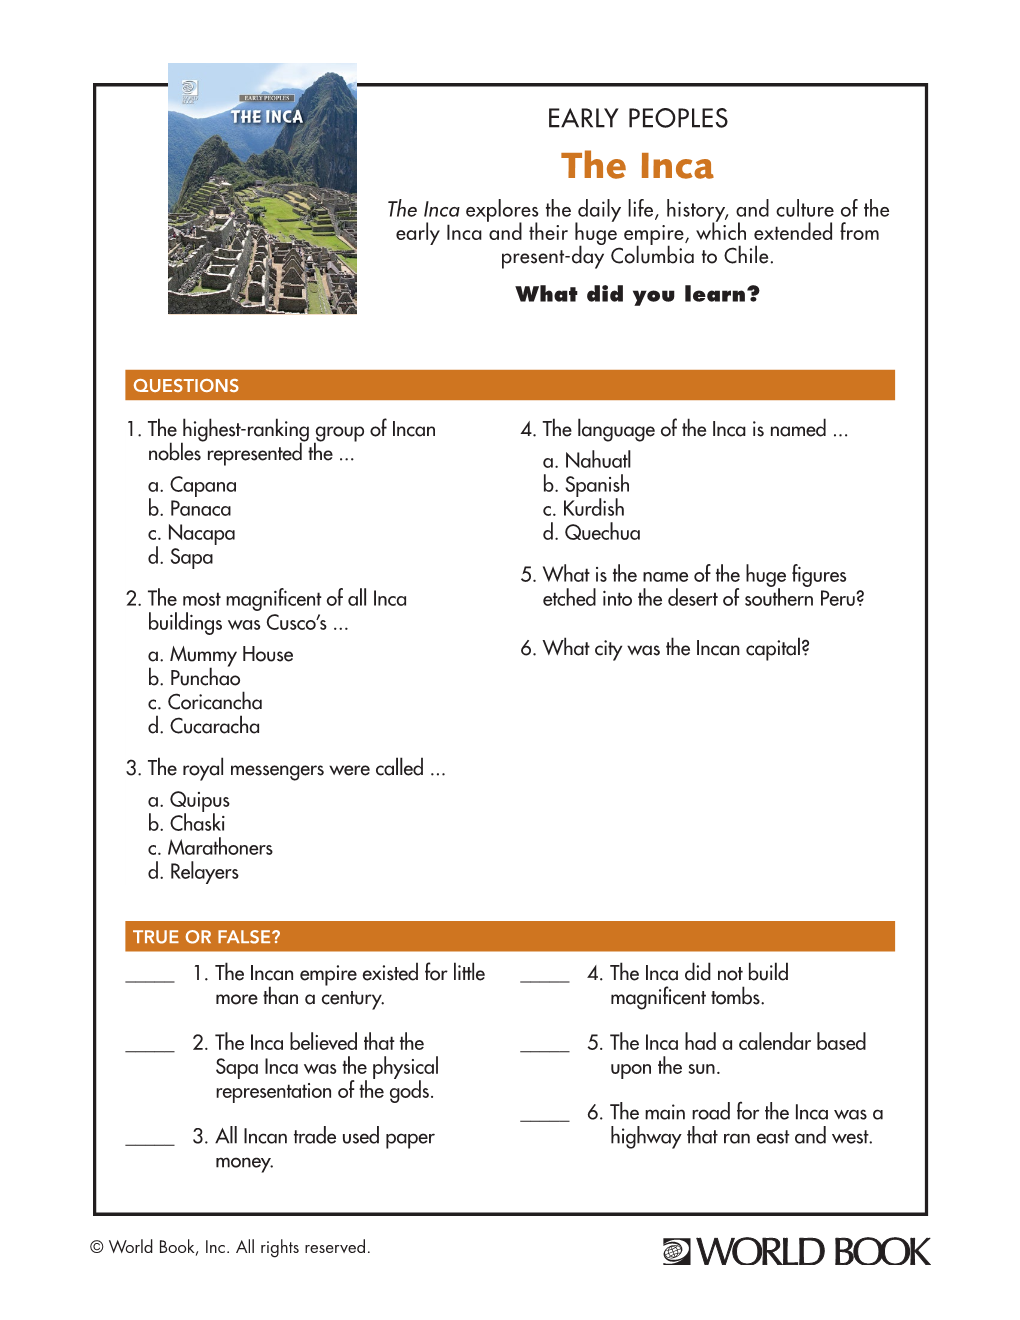 The Inca the Inca Explores the Daily Life, History, and Culture of the Early Inca and Their Huge Empire, Which Extended from Present-Day Columbia to Chile